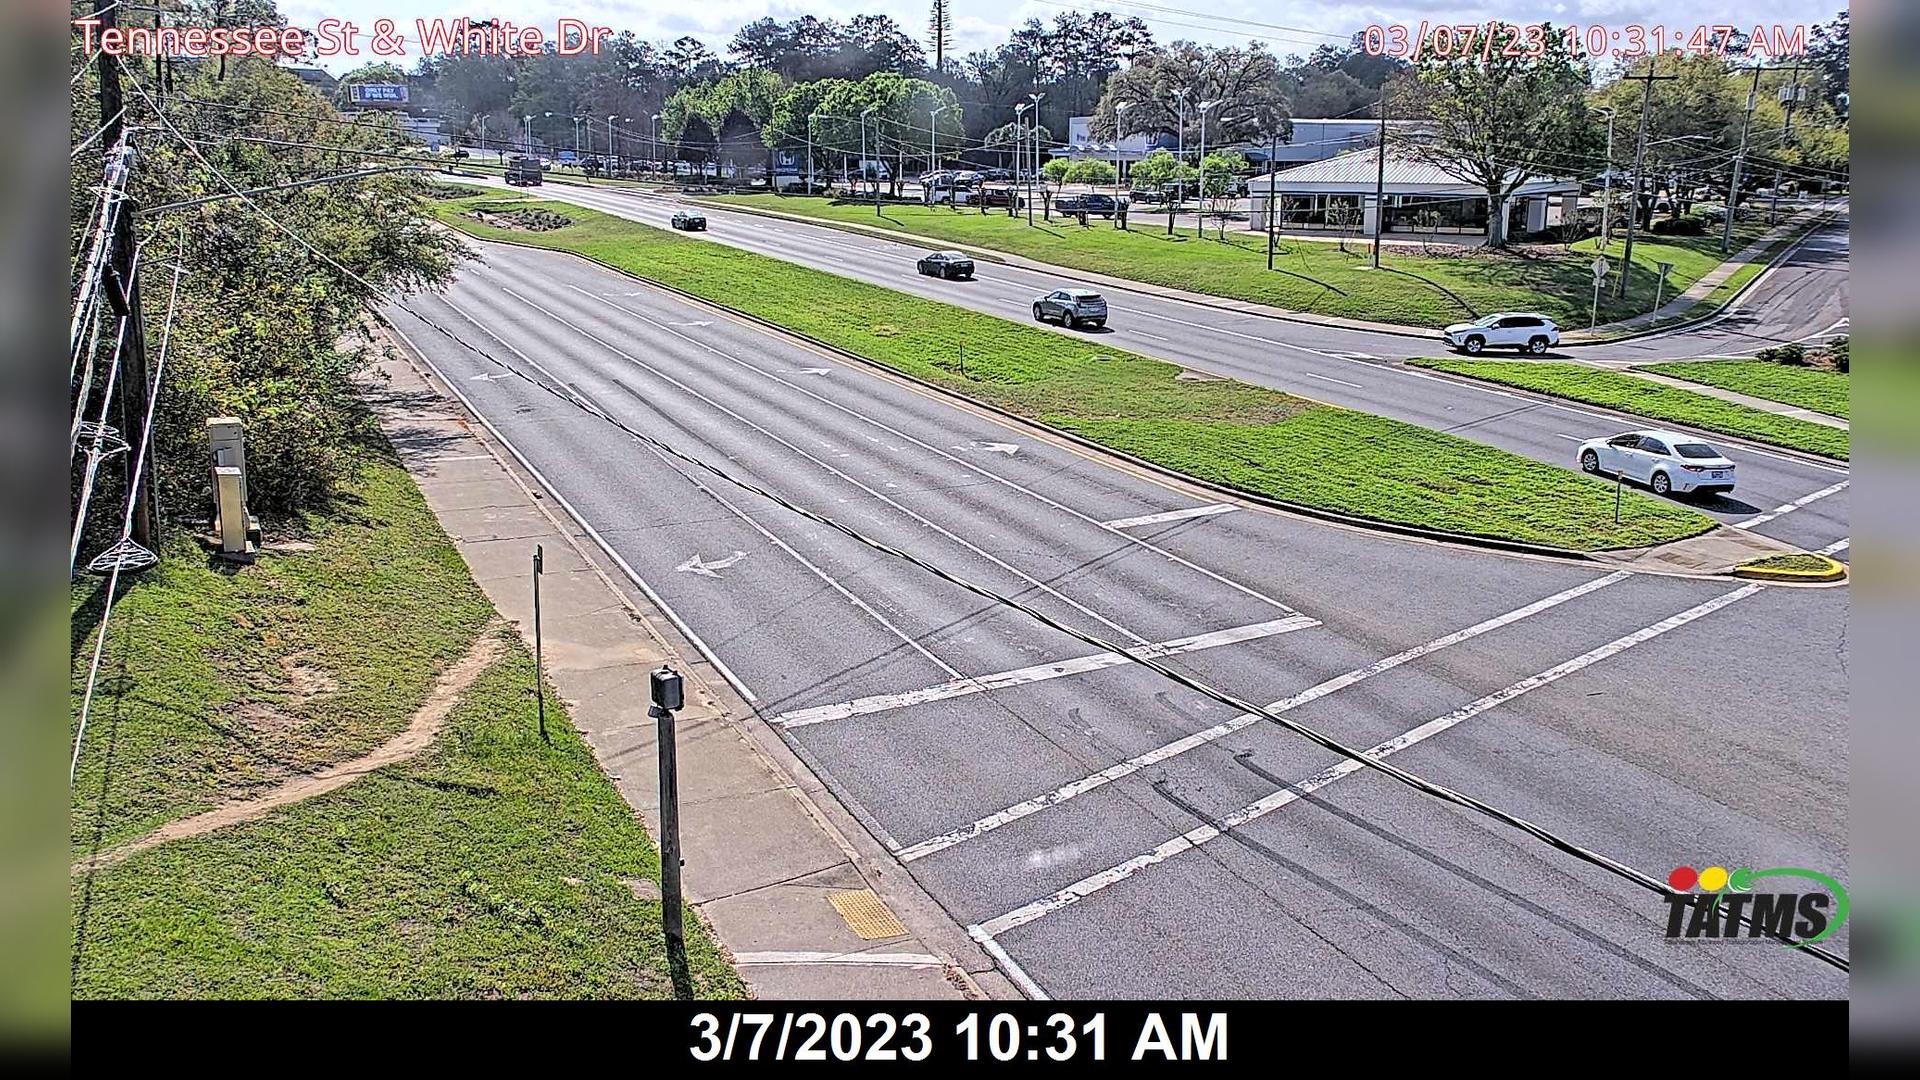 Traffic Cam Tallahassee: Tennessee St at White Dr